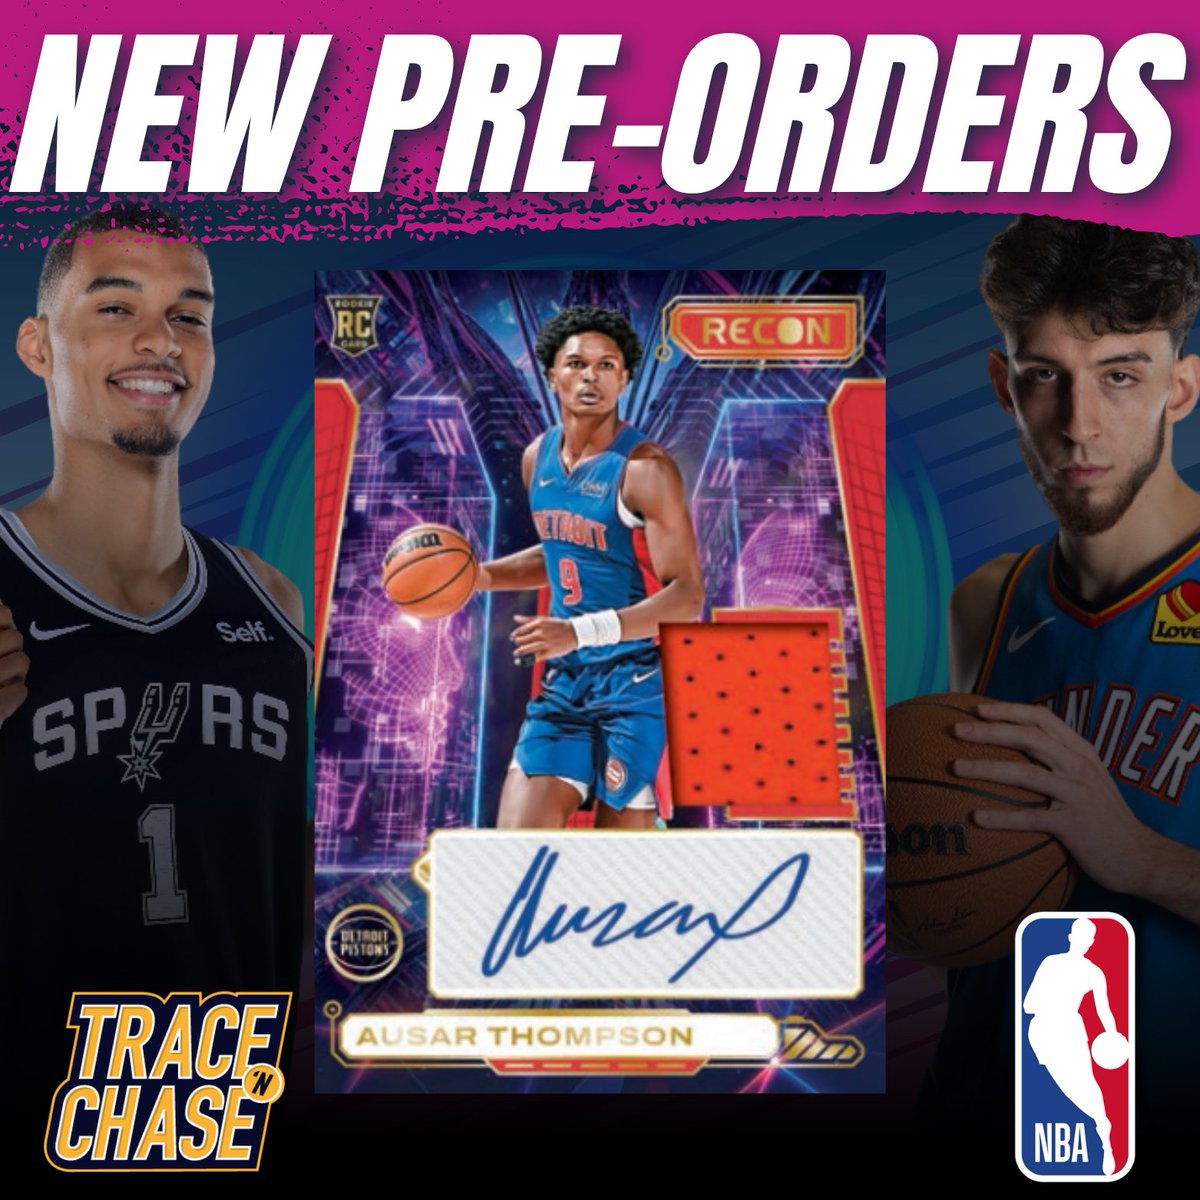 👉🏼Join the excitement with a standout choice, 2023-24 @PaniniAmerica Basketball Recon!
💥Pre-order to reserve your hobby box before it sells out!
 
#thehobby #bgs10 #psa10 #whodoyoucollect #tracenchsse #tracenchaseskg #bycollectorsforcollectors #RC #showyourhits @HobbyConnector